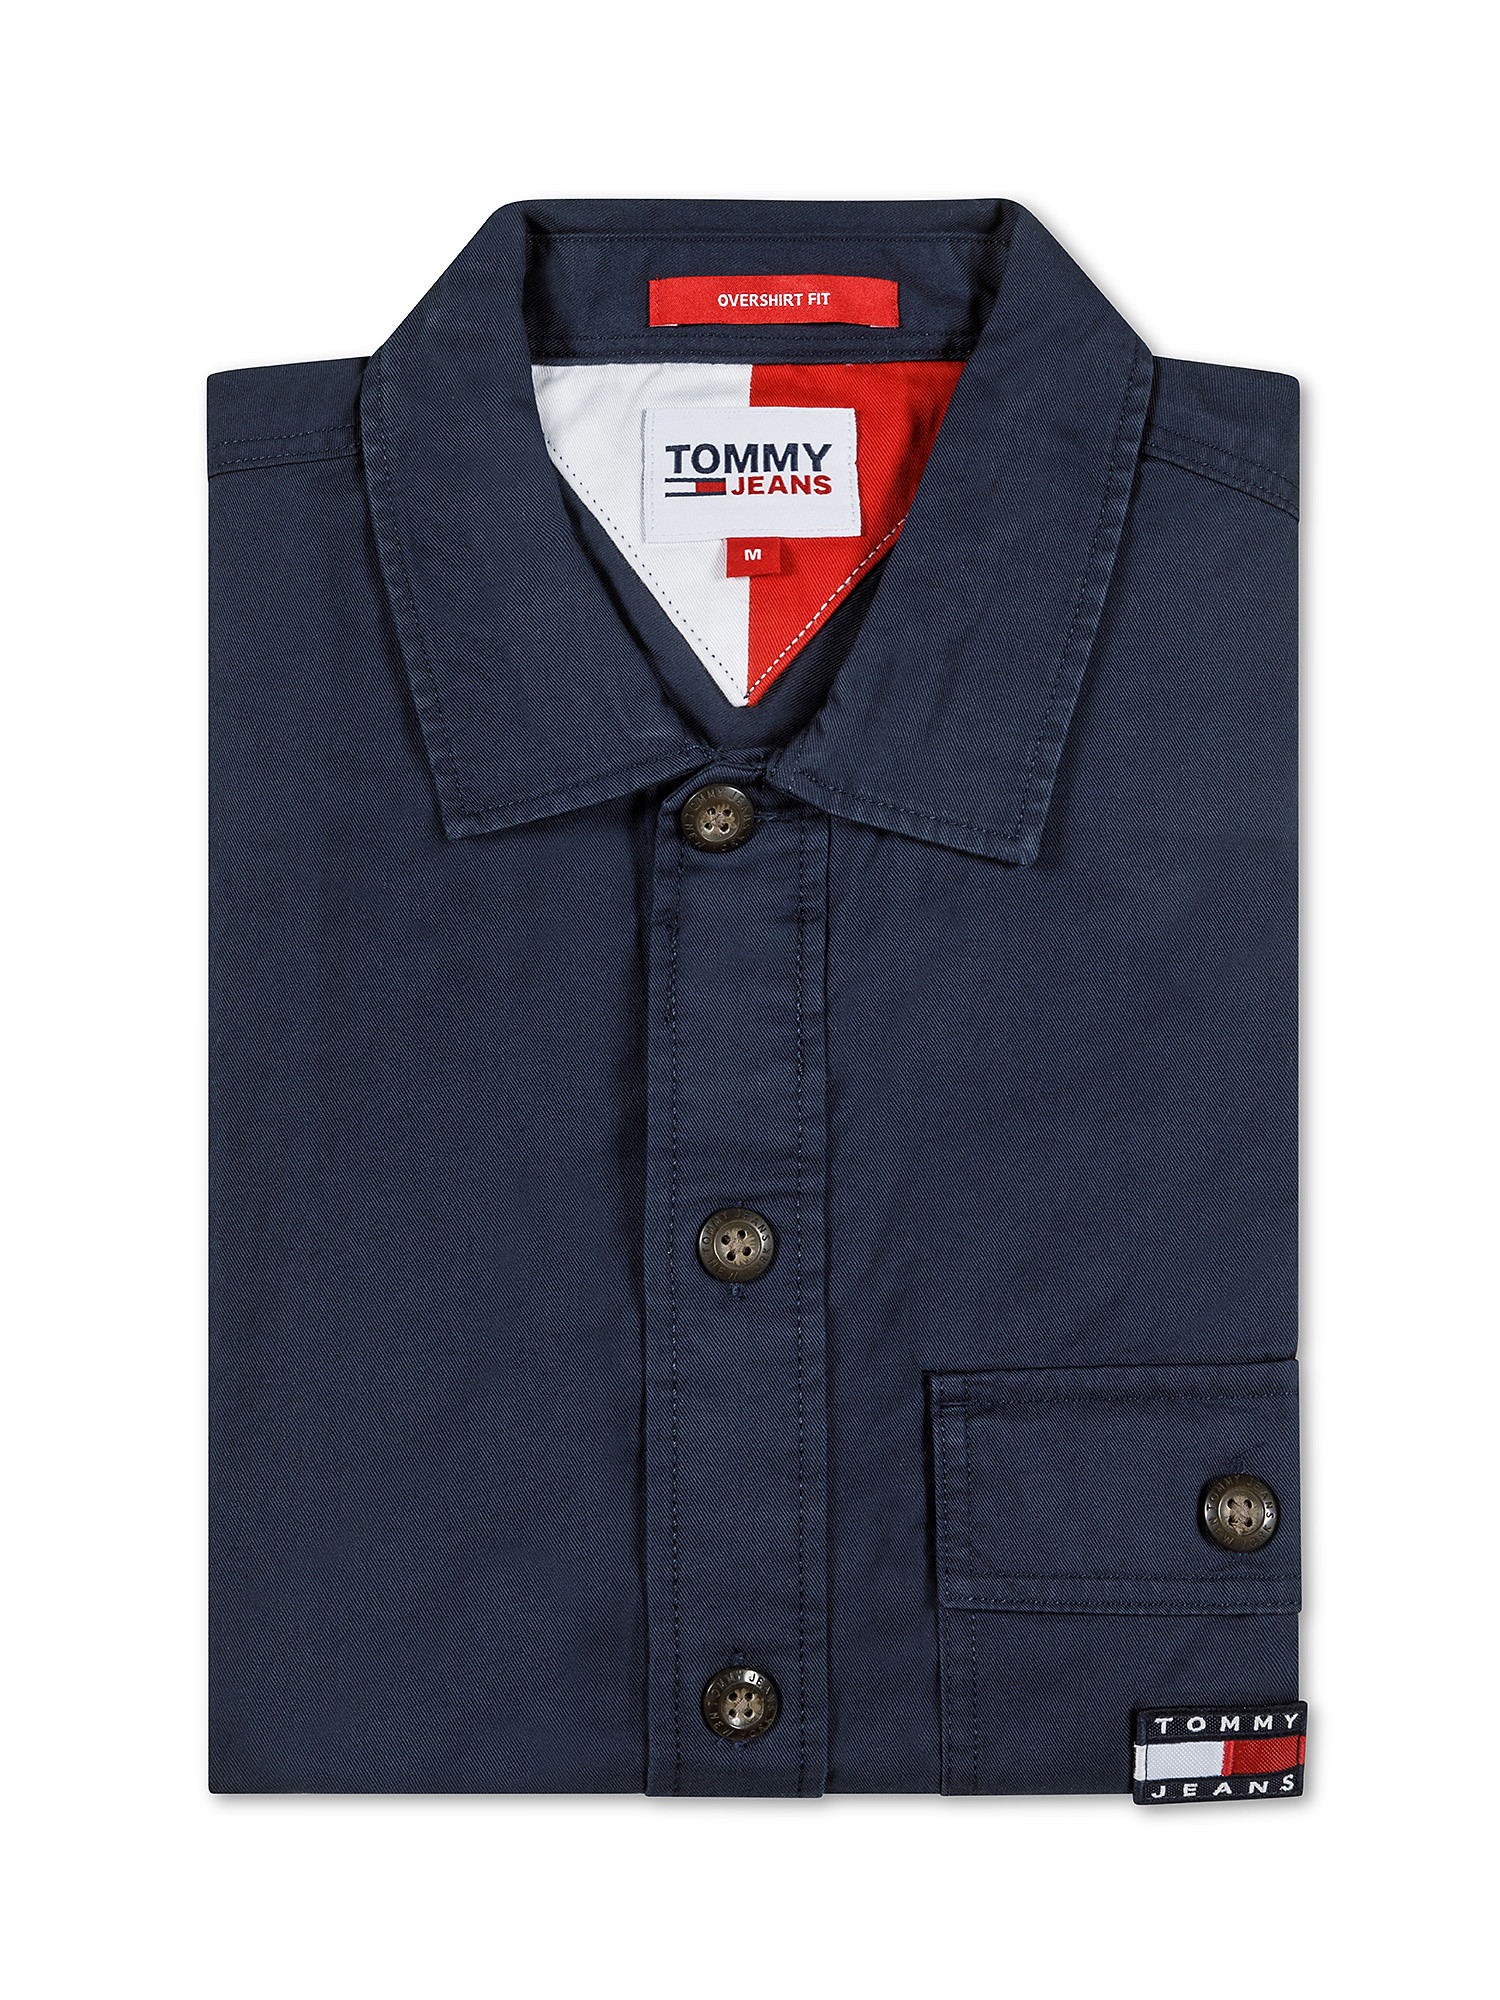 Tommy Jeans - Cotton shirt with logo, Dark Blue, large image number 2